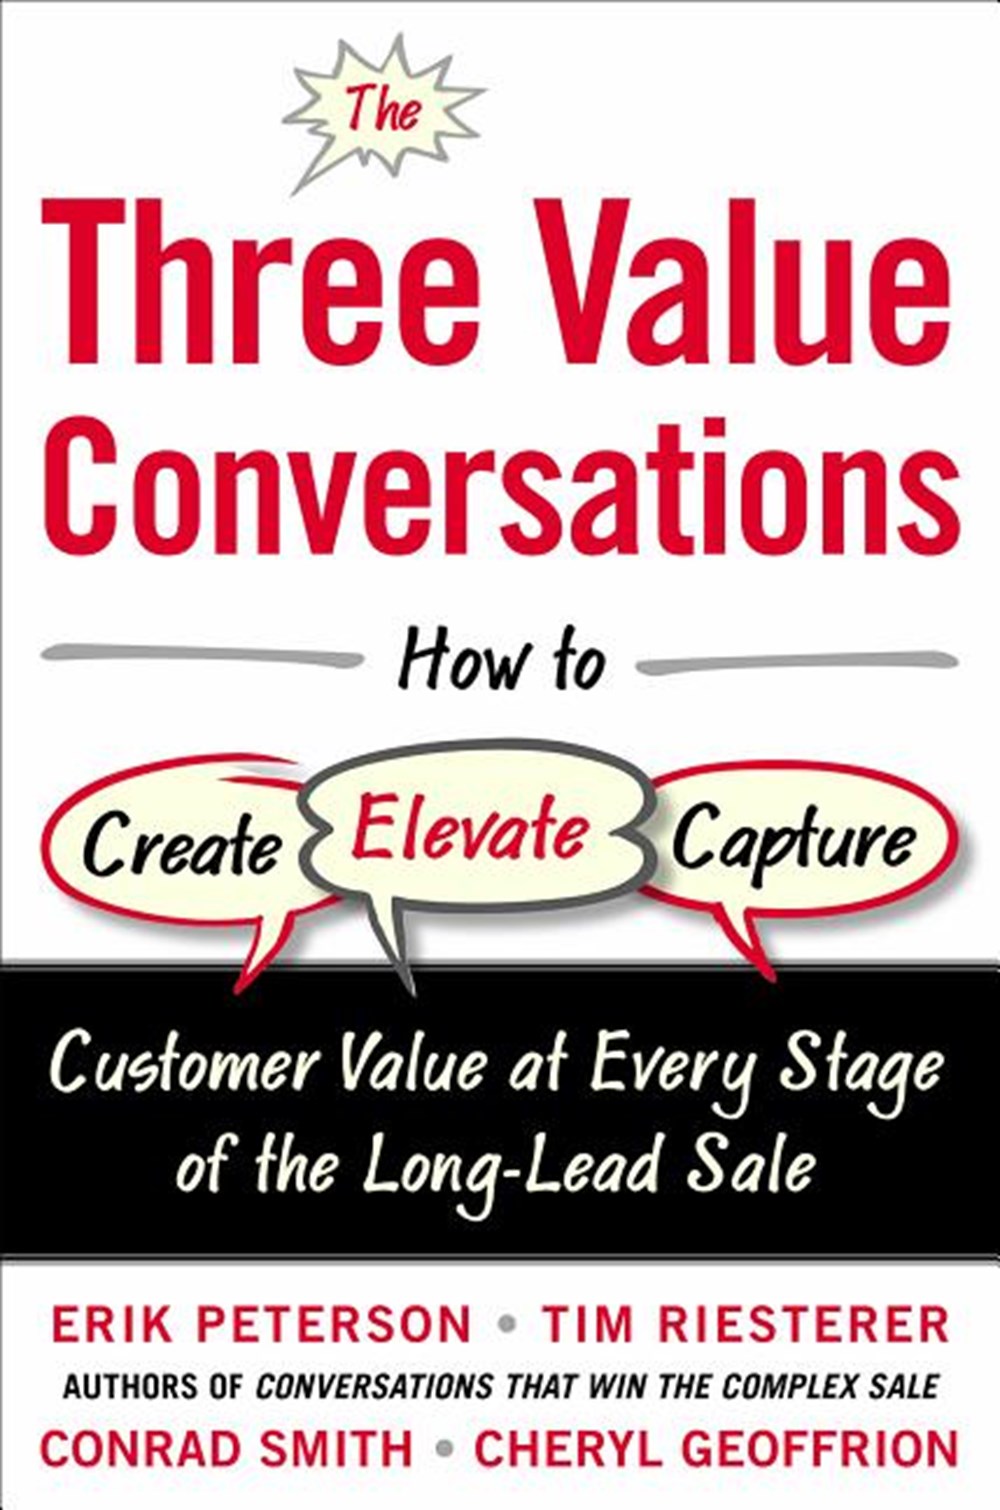 Three Value Conversations: How to Create, Elevate, and Capture Customer Value at Every Stage of the 